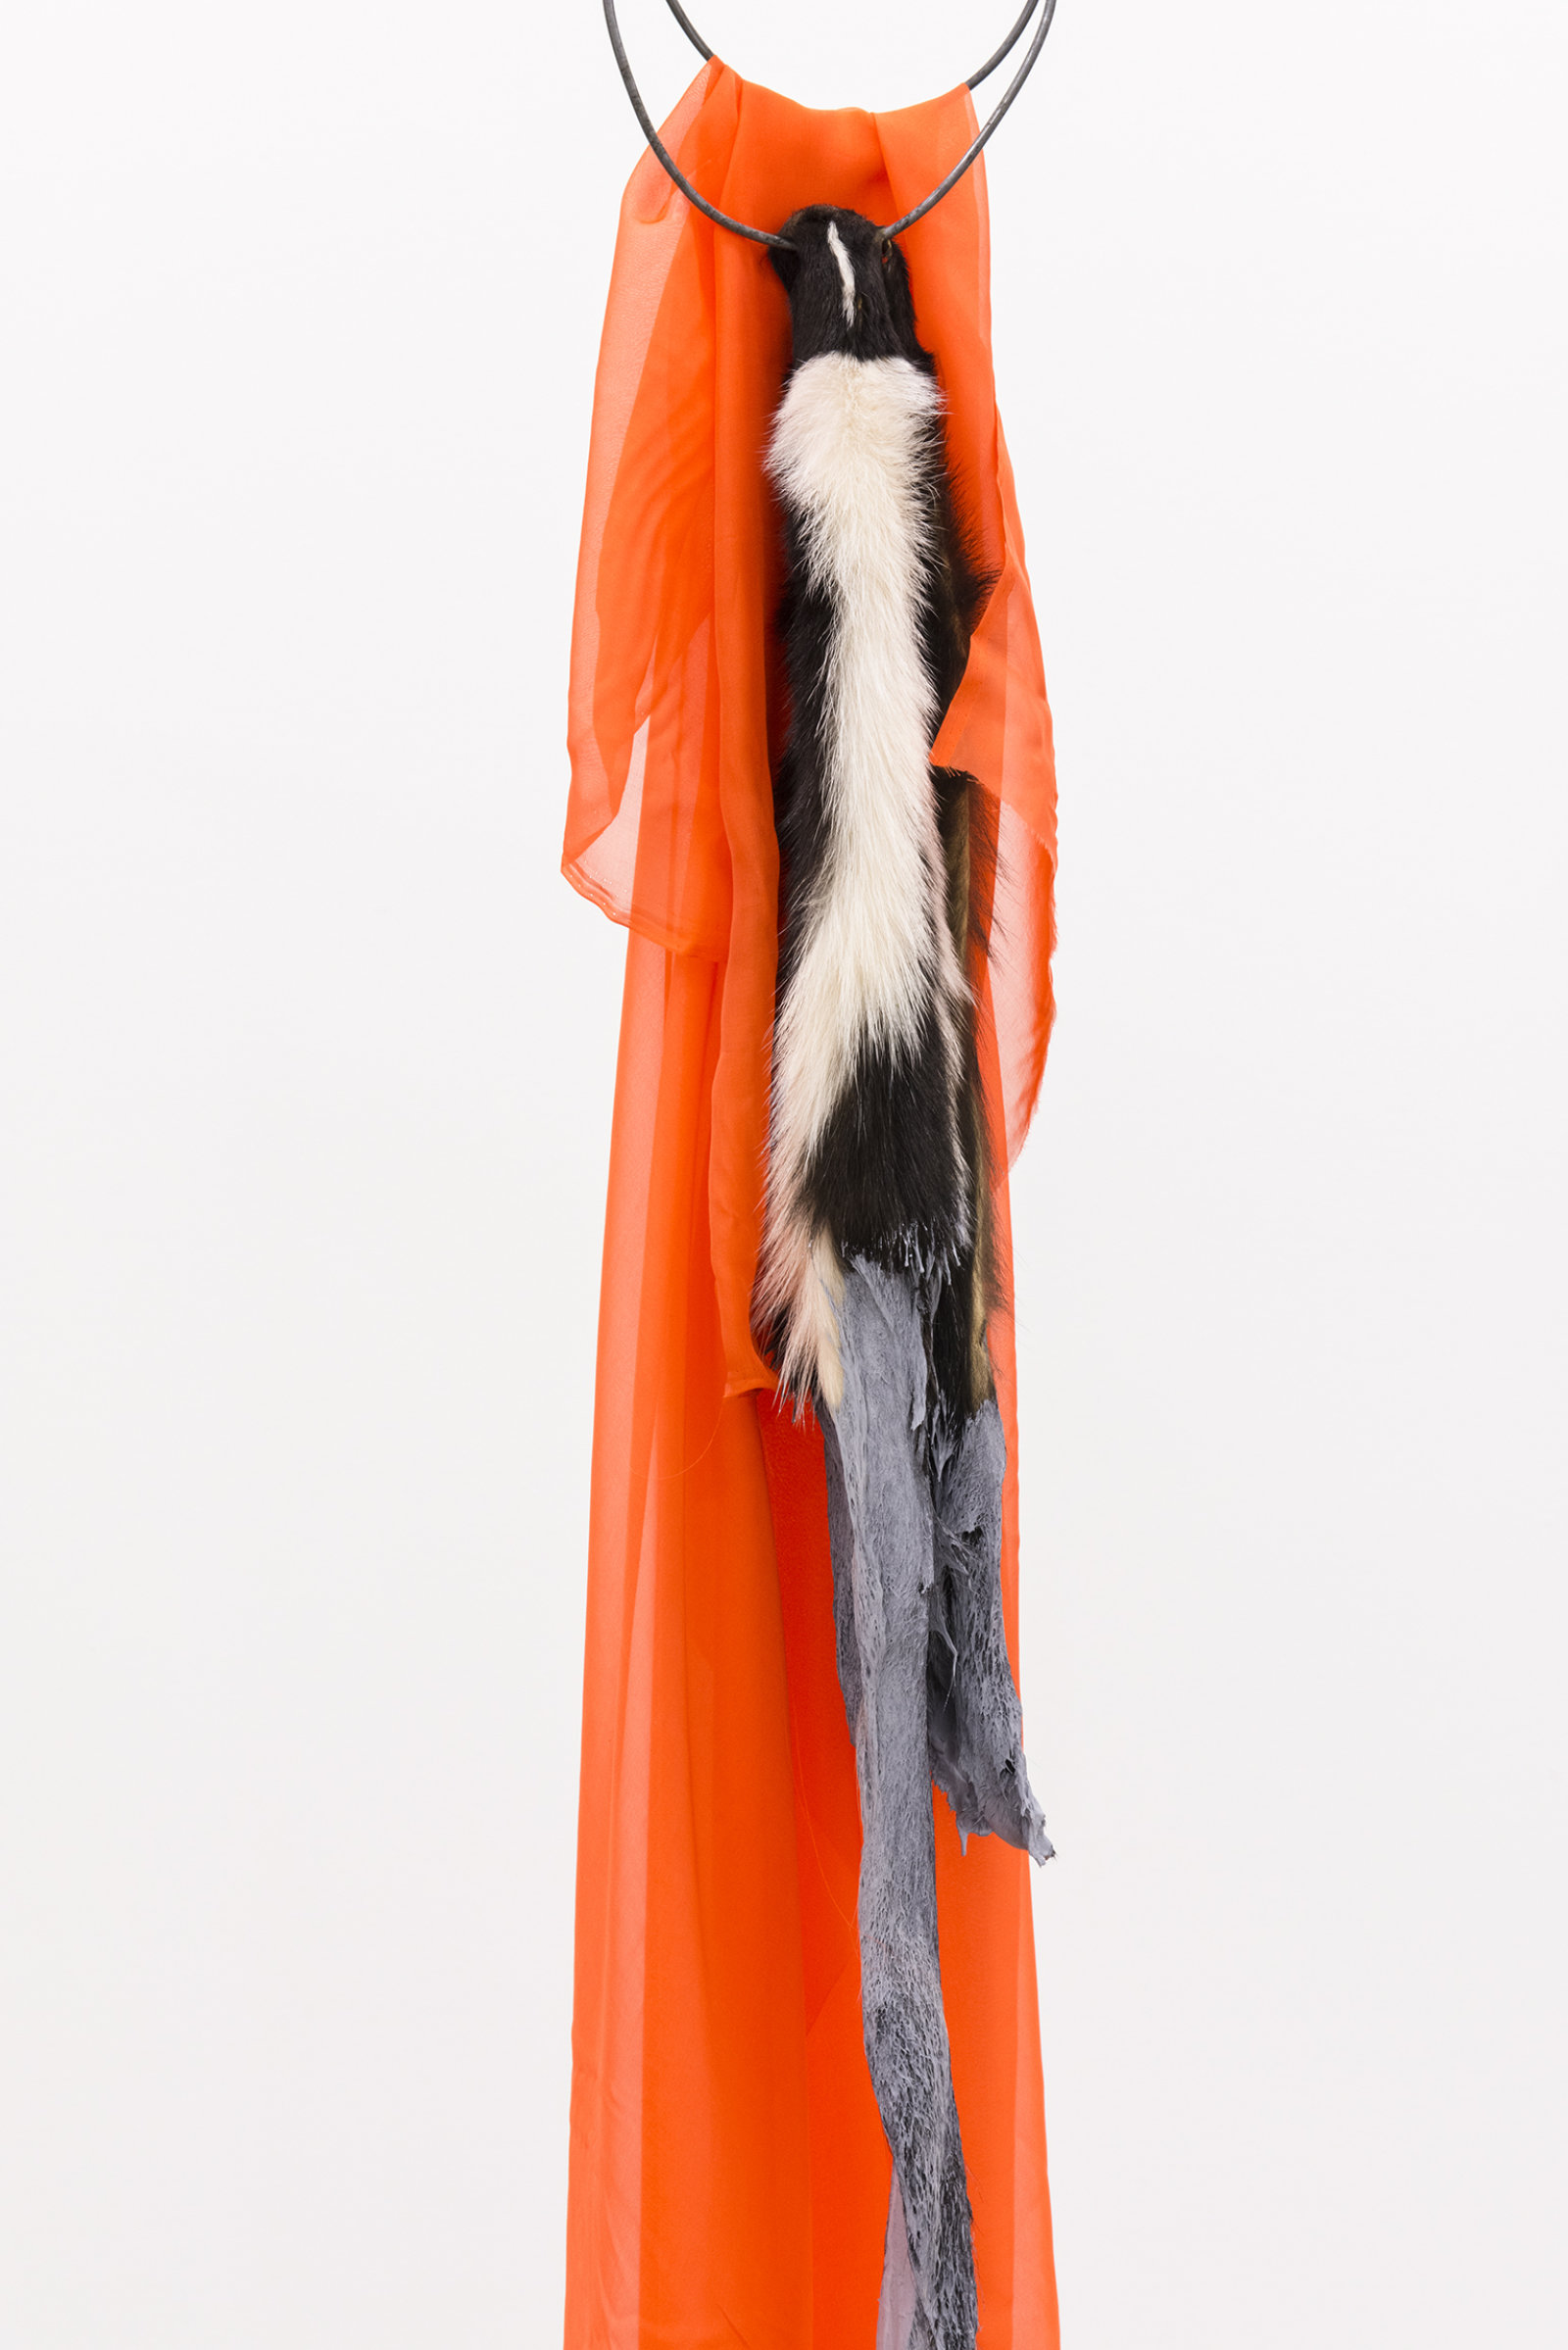 Duane Linklater, The most beautiful thing in the world (detail), 2014, skunk fur, paint, garment rack, hangers, fabric, 66 x 60 x 20 in. (168 x 151 x 52 cm)